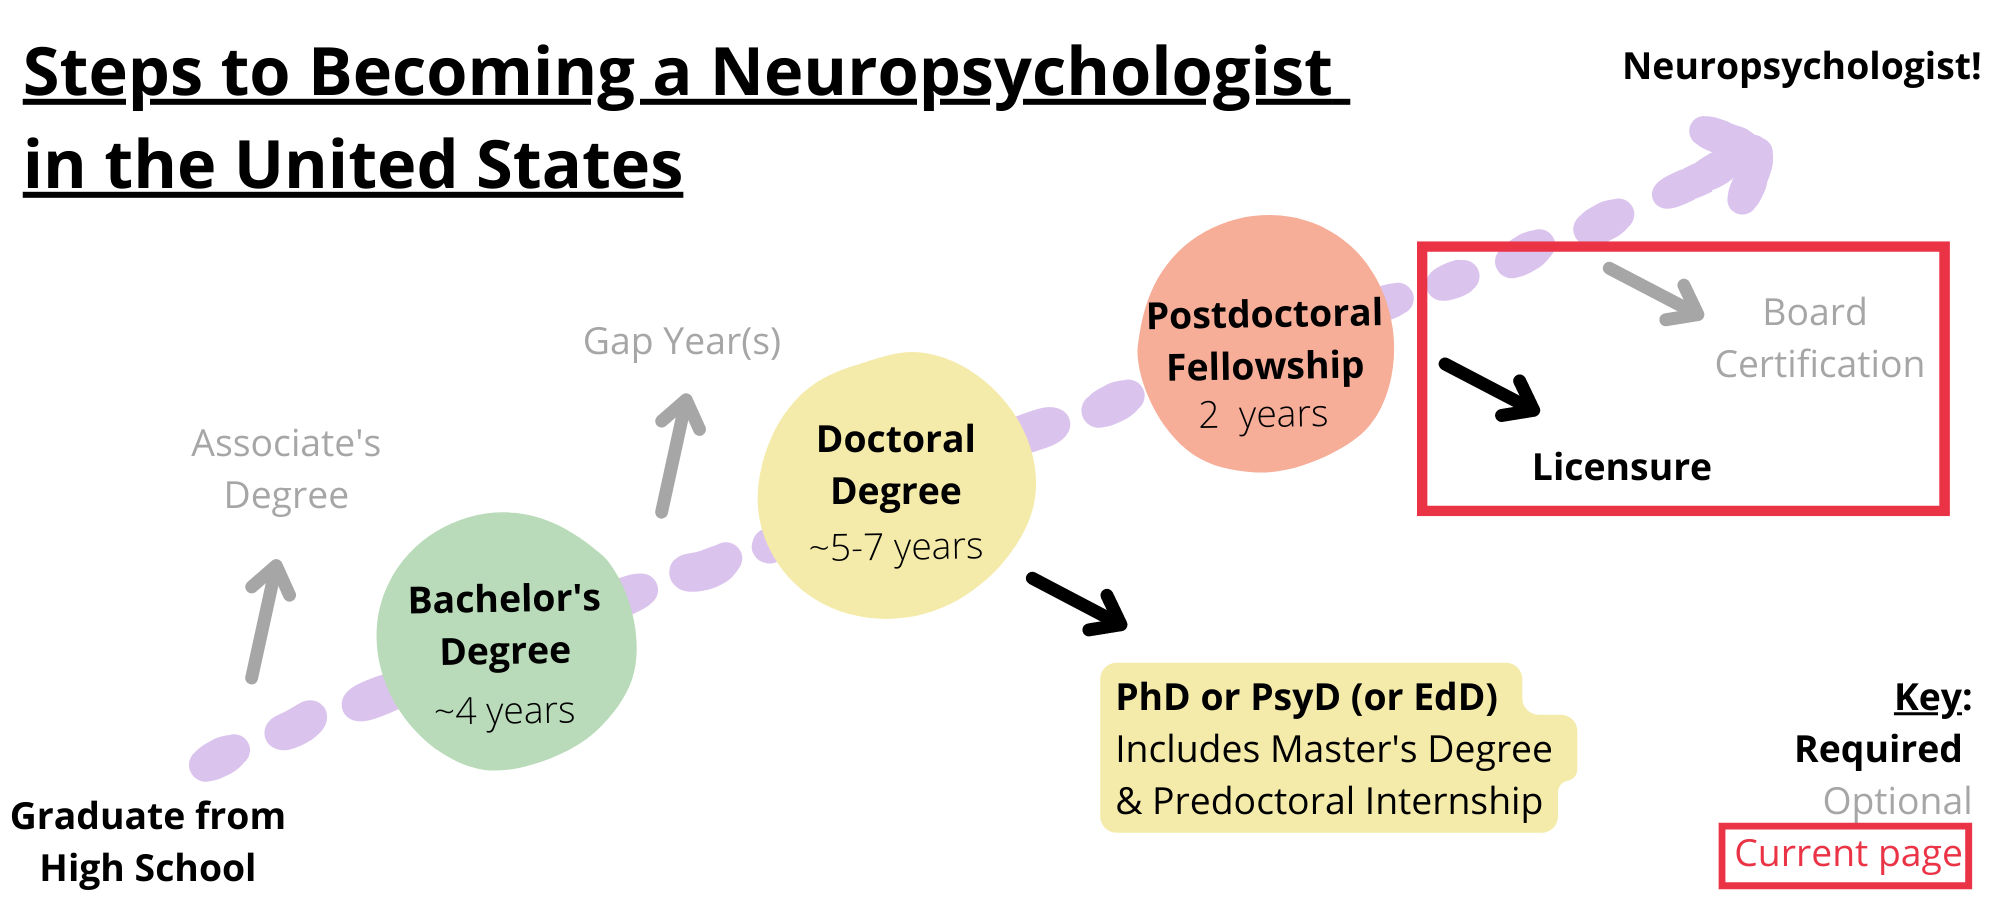 Steps to becoming a neuropsychologist in the United States. Required steps include graduating from high school, obtaining a bachelor’s degree, obtaining a doctoral degree like a PhD, PsyD, or EdD, completing a postdoctoral fellowship, and licensure. Optional steps include obtaining an associate’s degree, taking a gap year, and board certification. You are on the step licensure and board certification